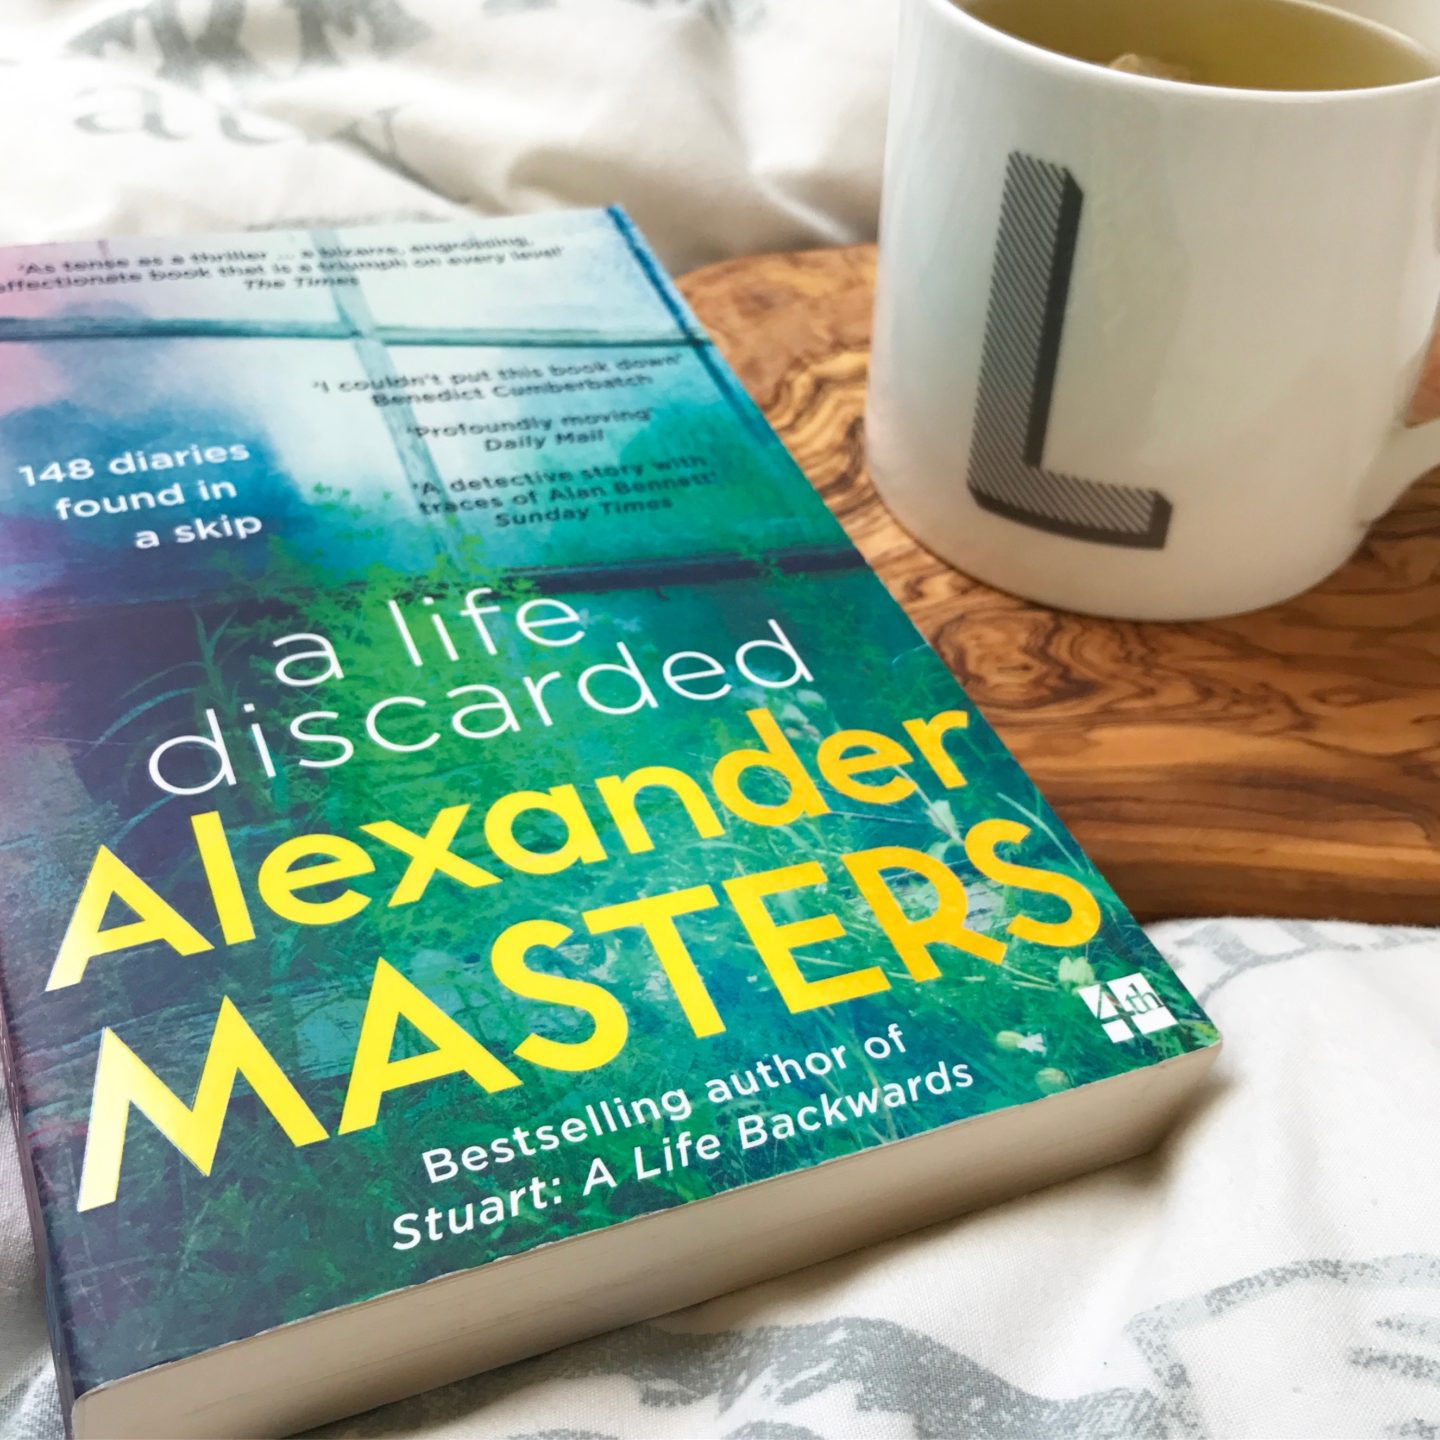 A Life Discarded by Alexander Masters